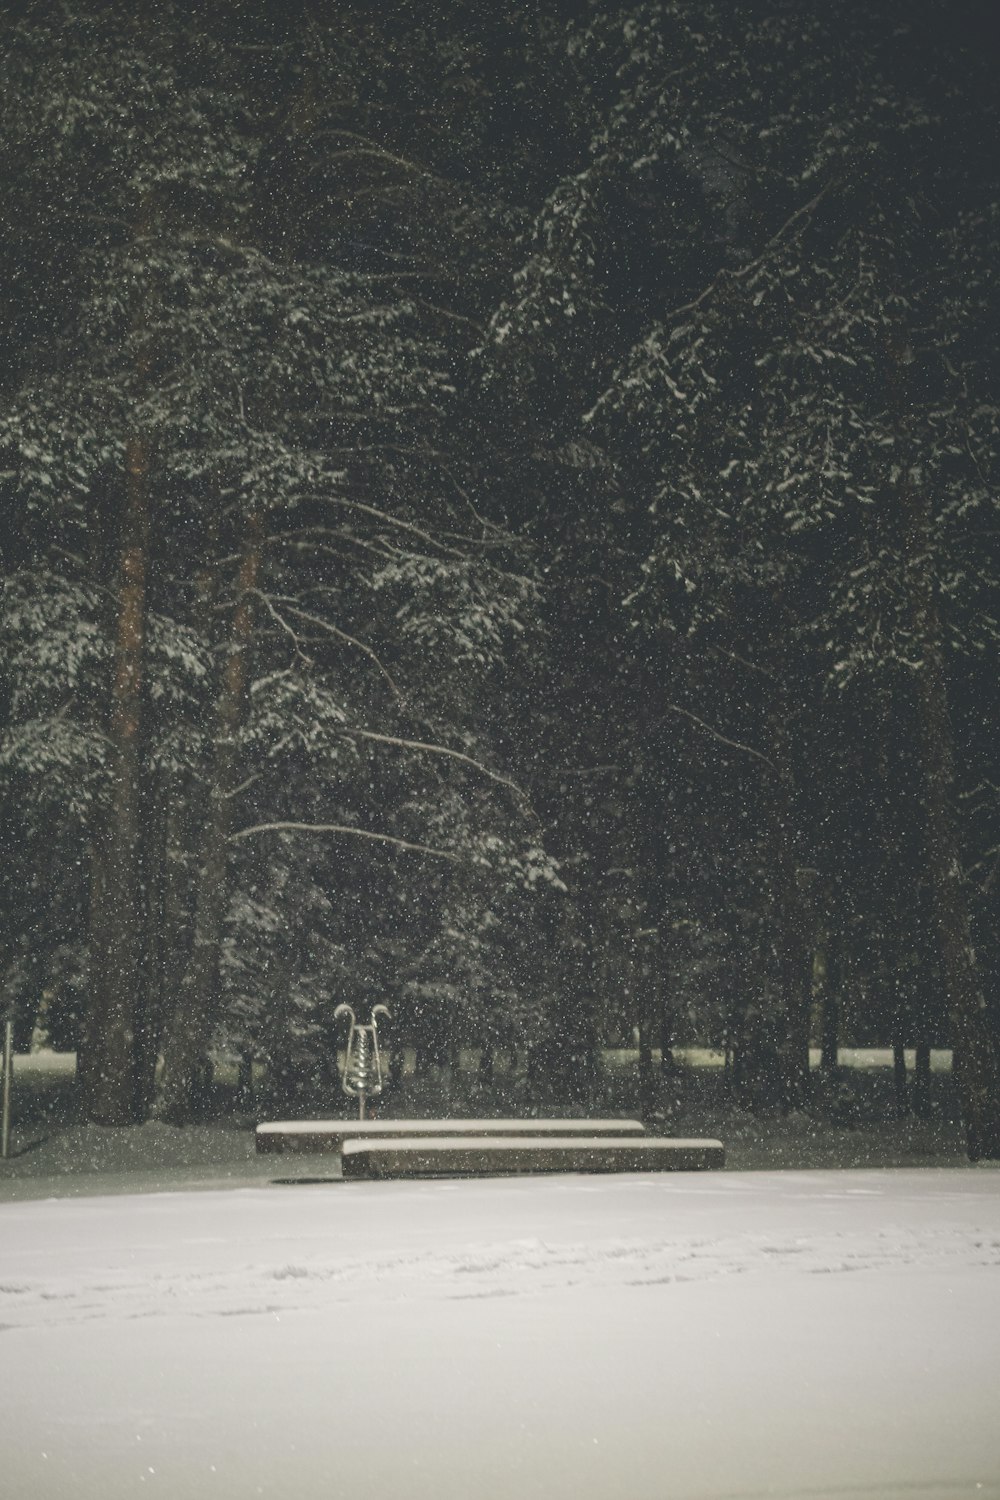 a park bench in the middle of a snowy park